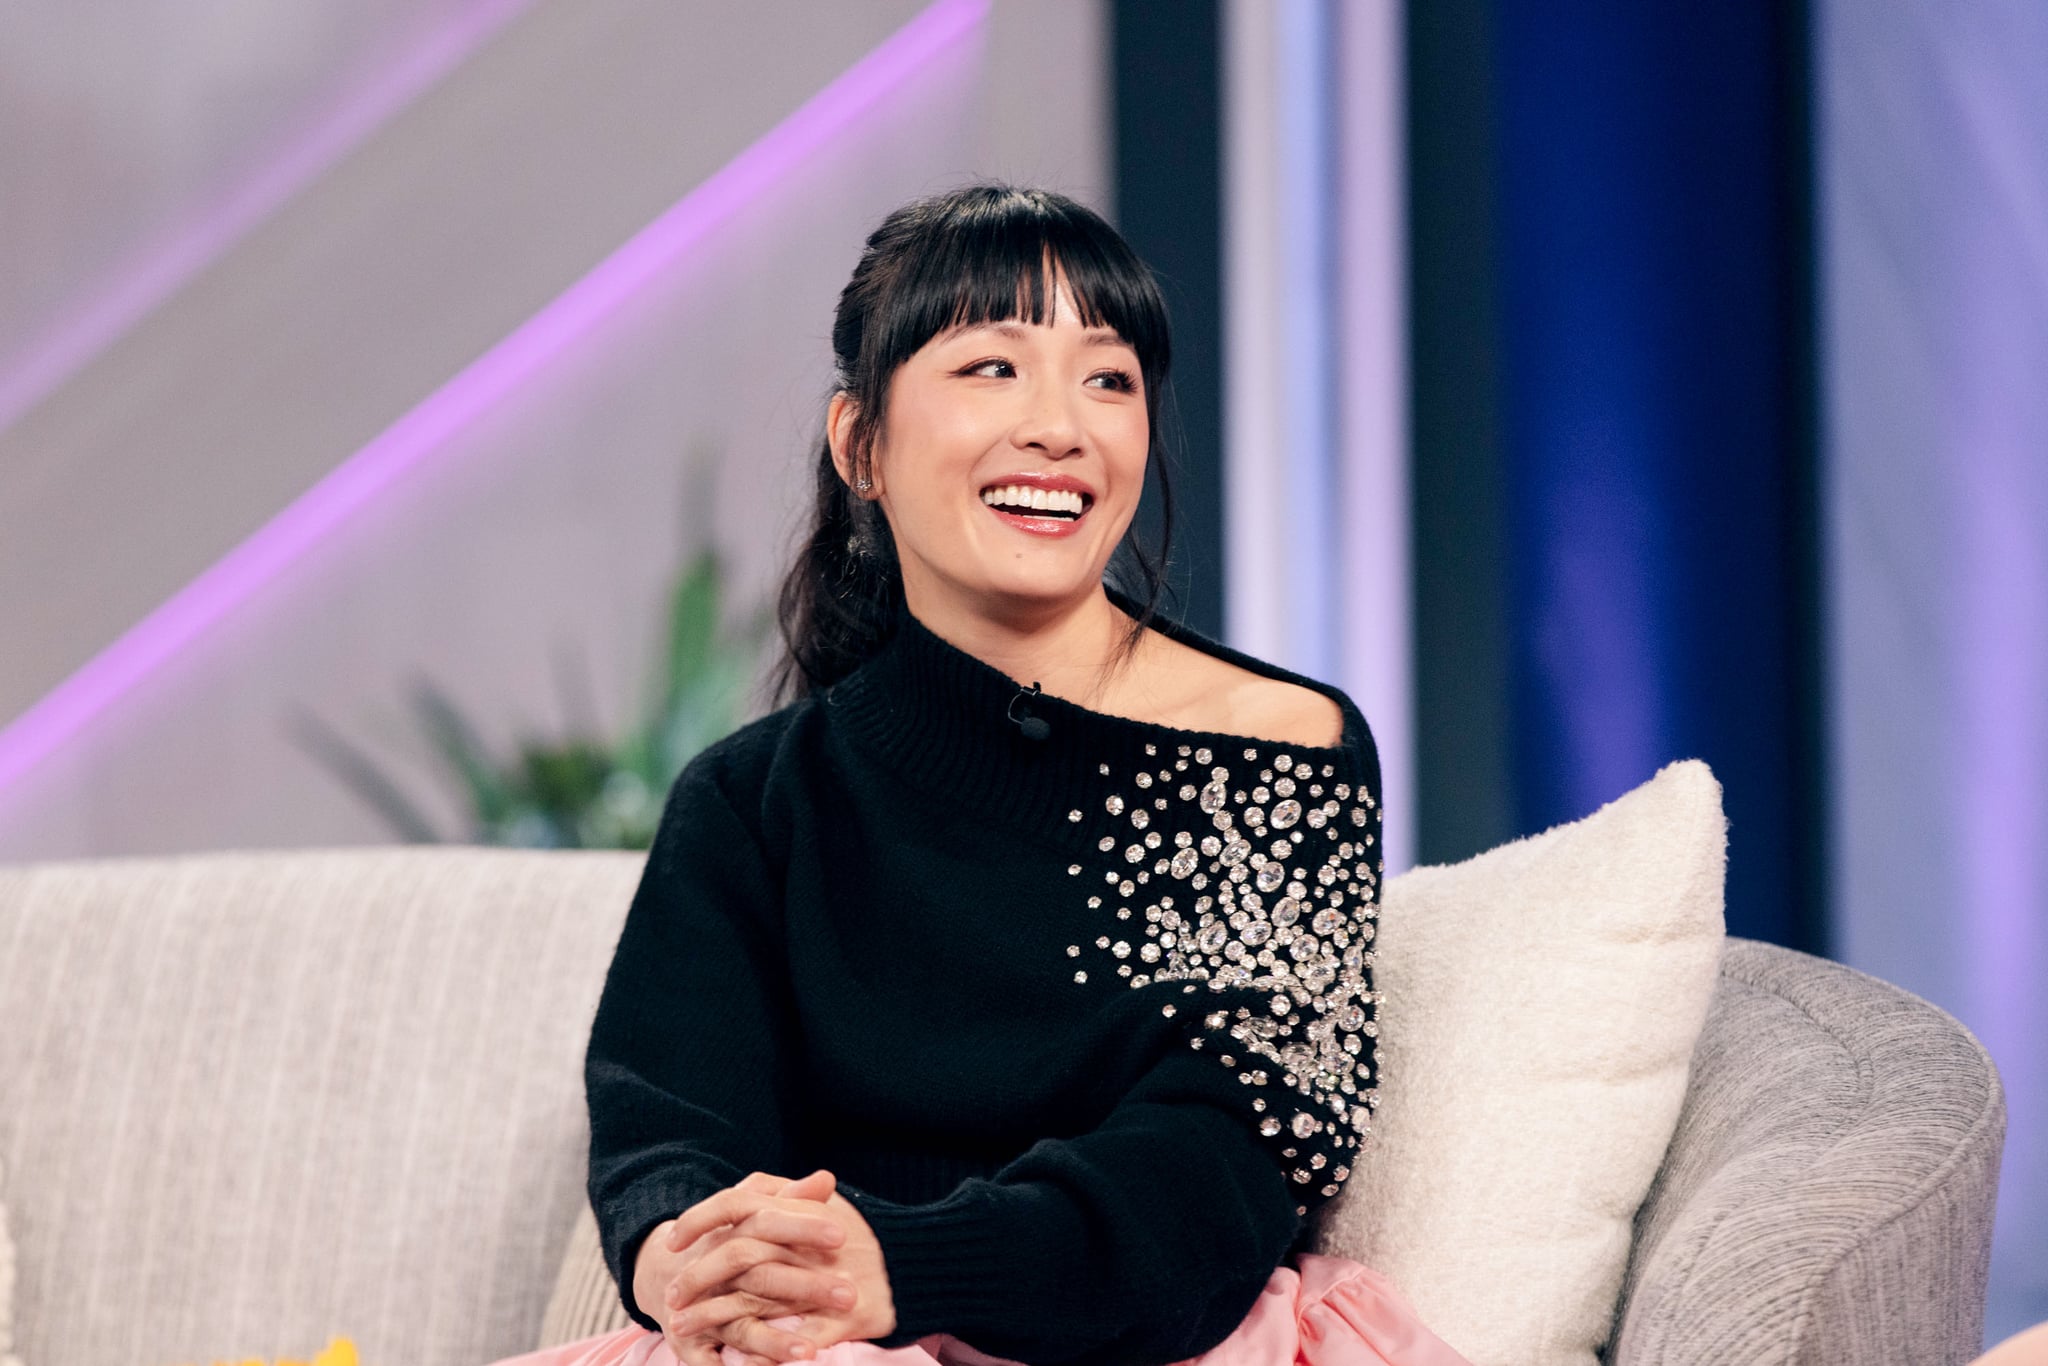 THE KELLY CLARKSON SHOW -- Episode J019 -- Pictured: Constance Wu -- (Photo by: Weiss Eubanks/NBCUniversal via Getty Images)